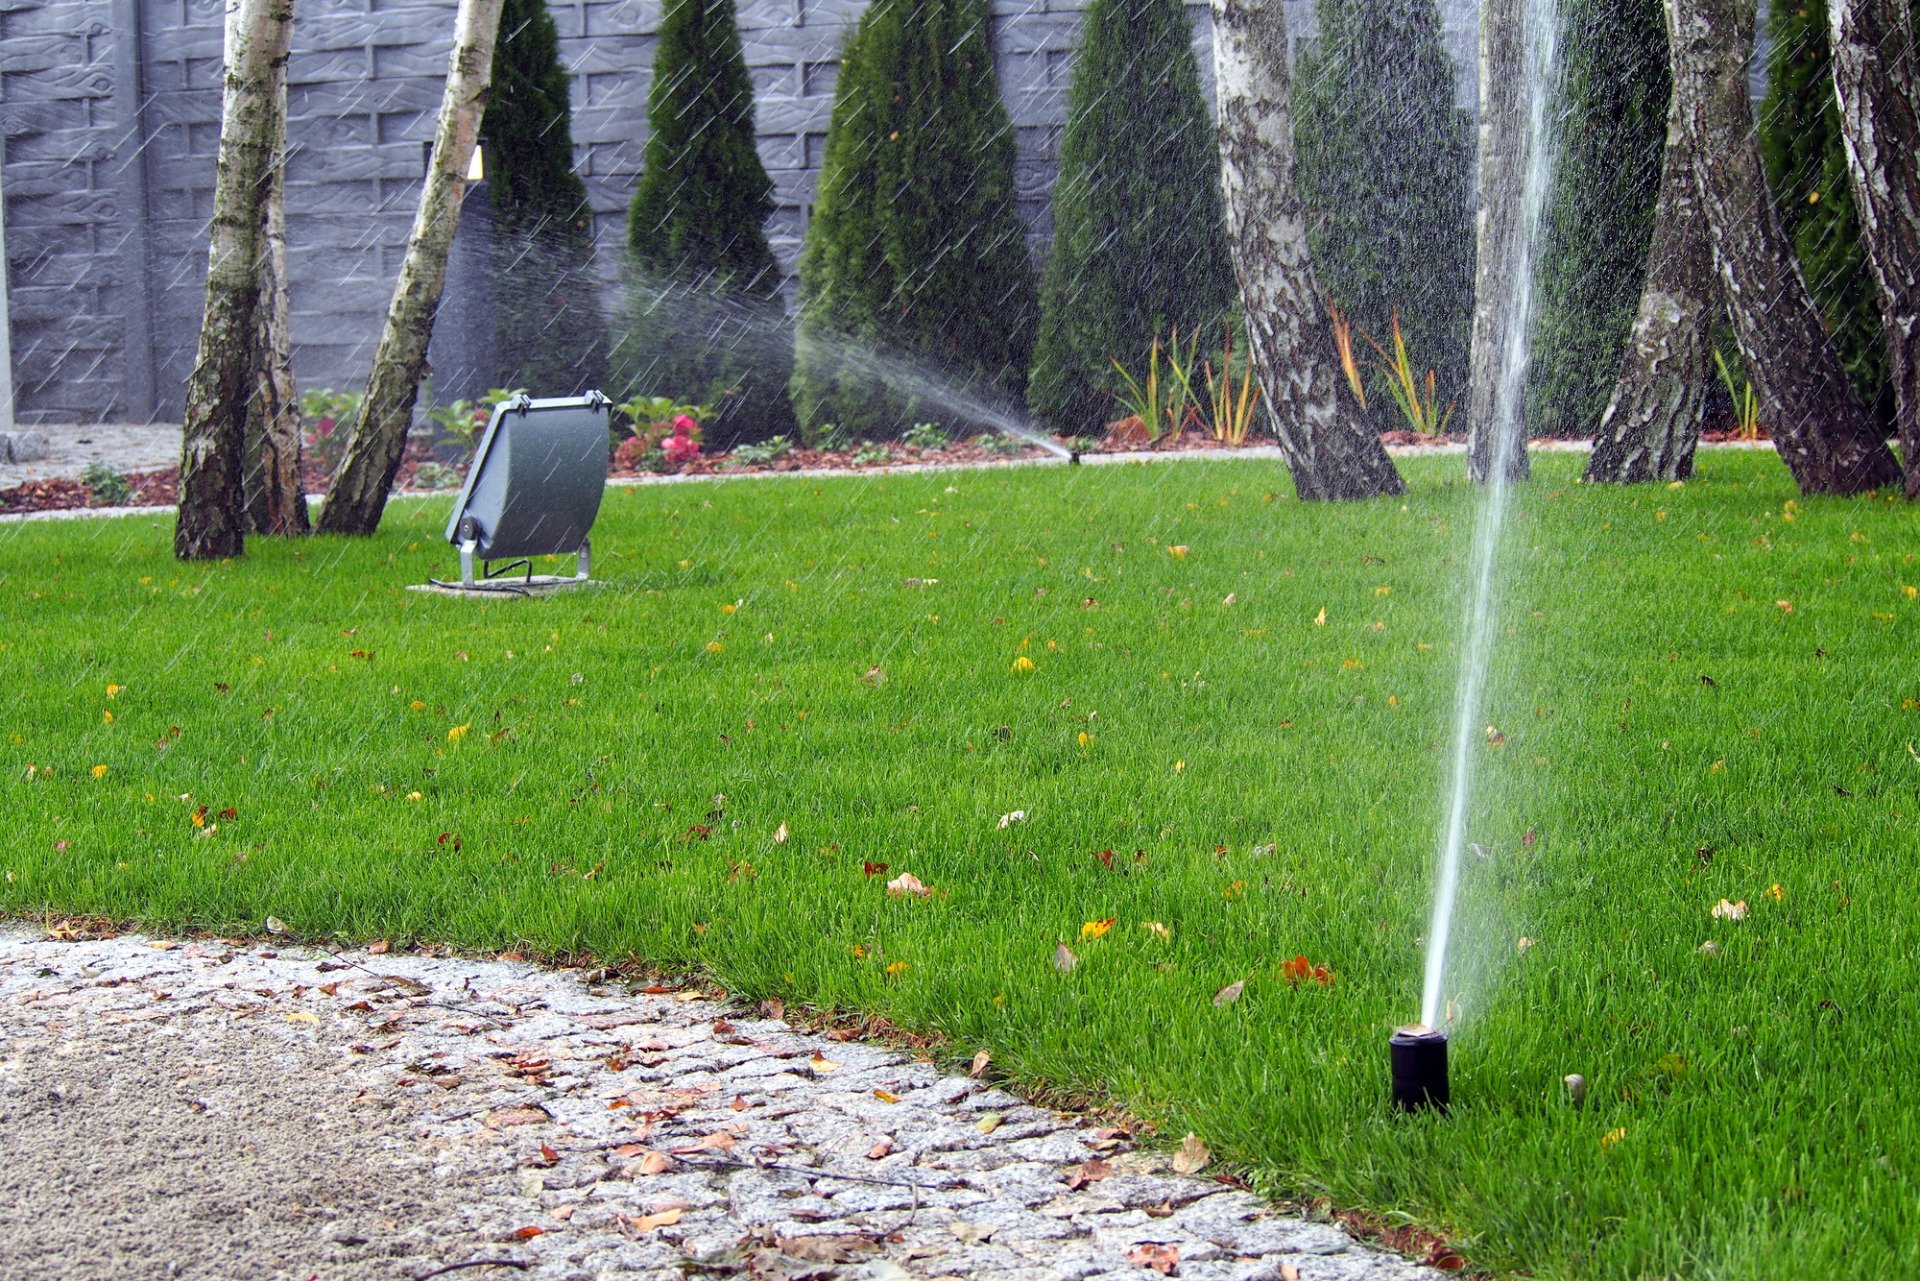 watering a green lawn - autumn lawn care